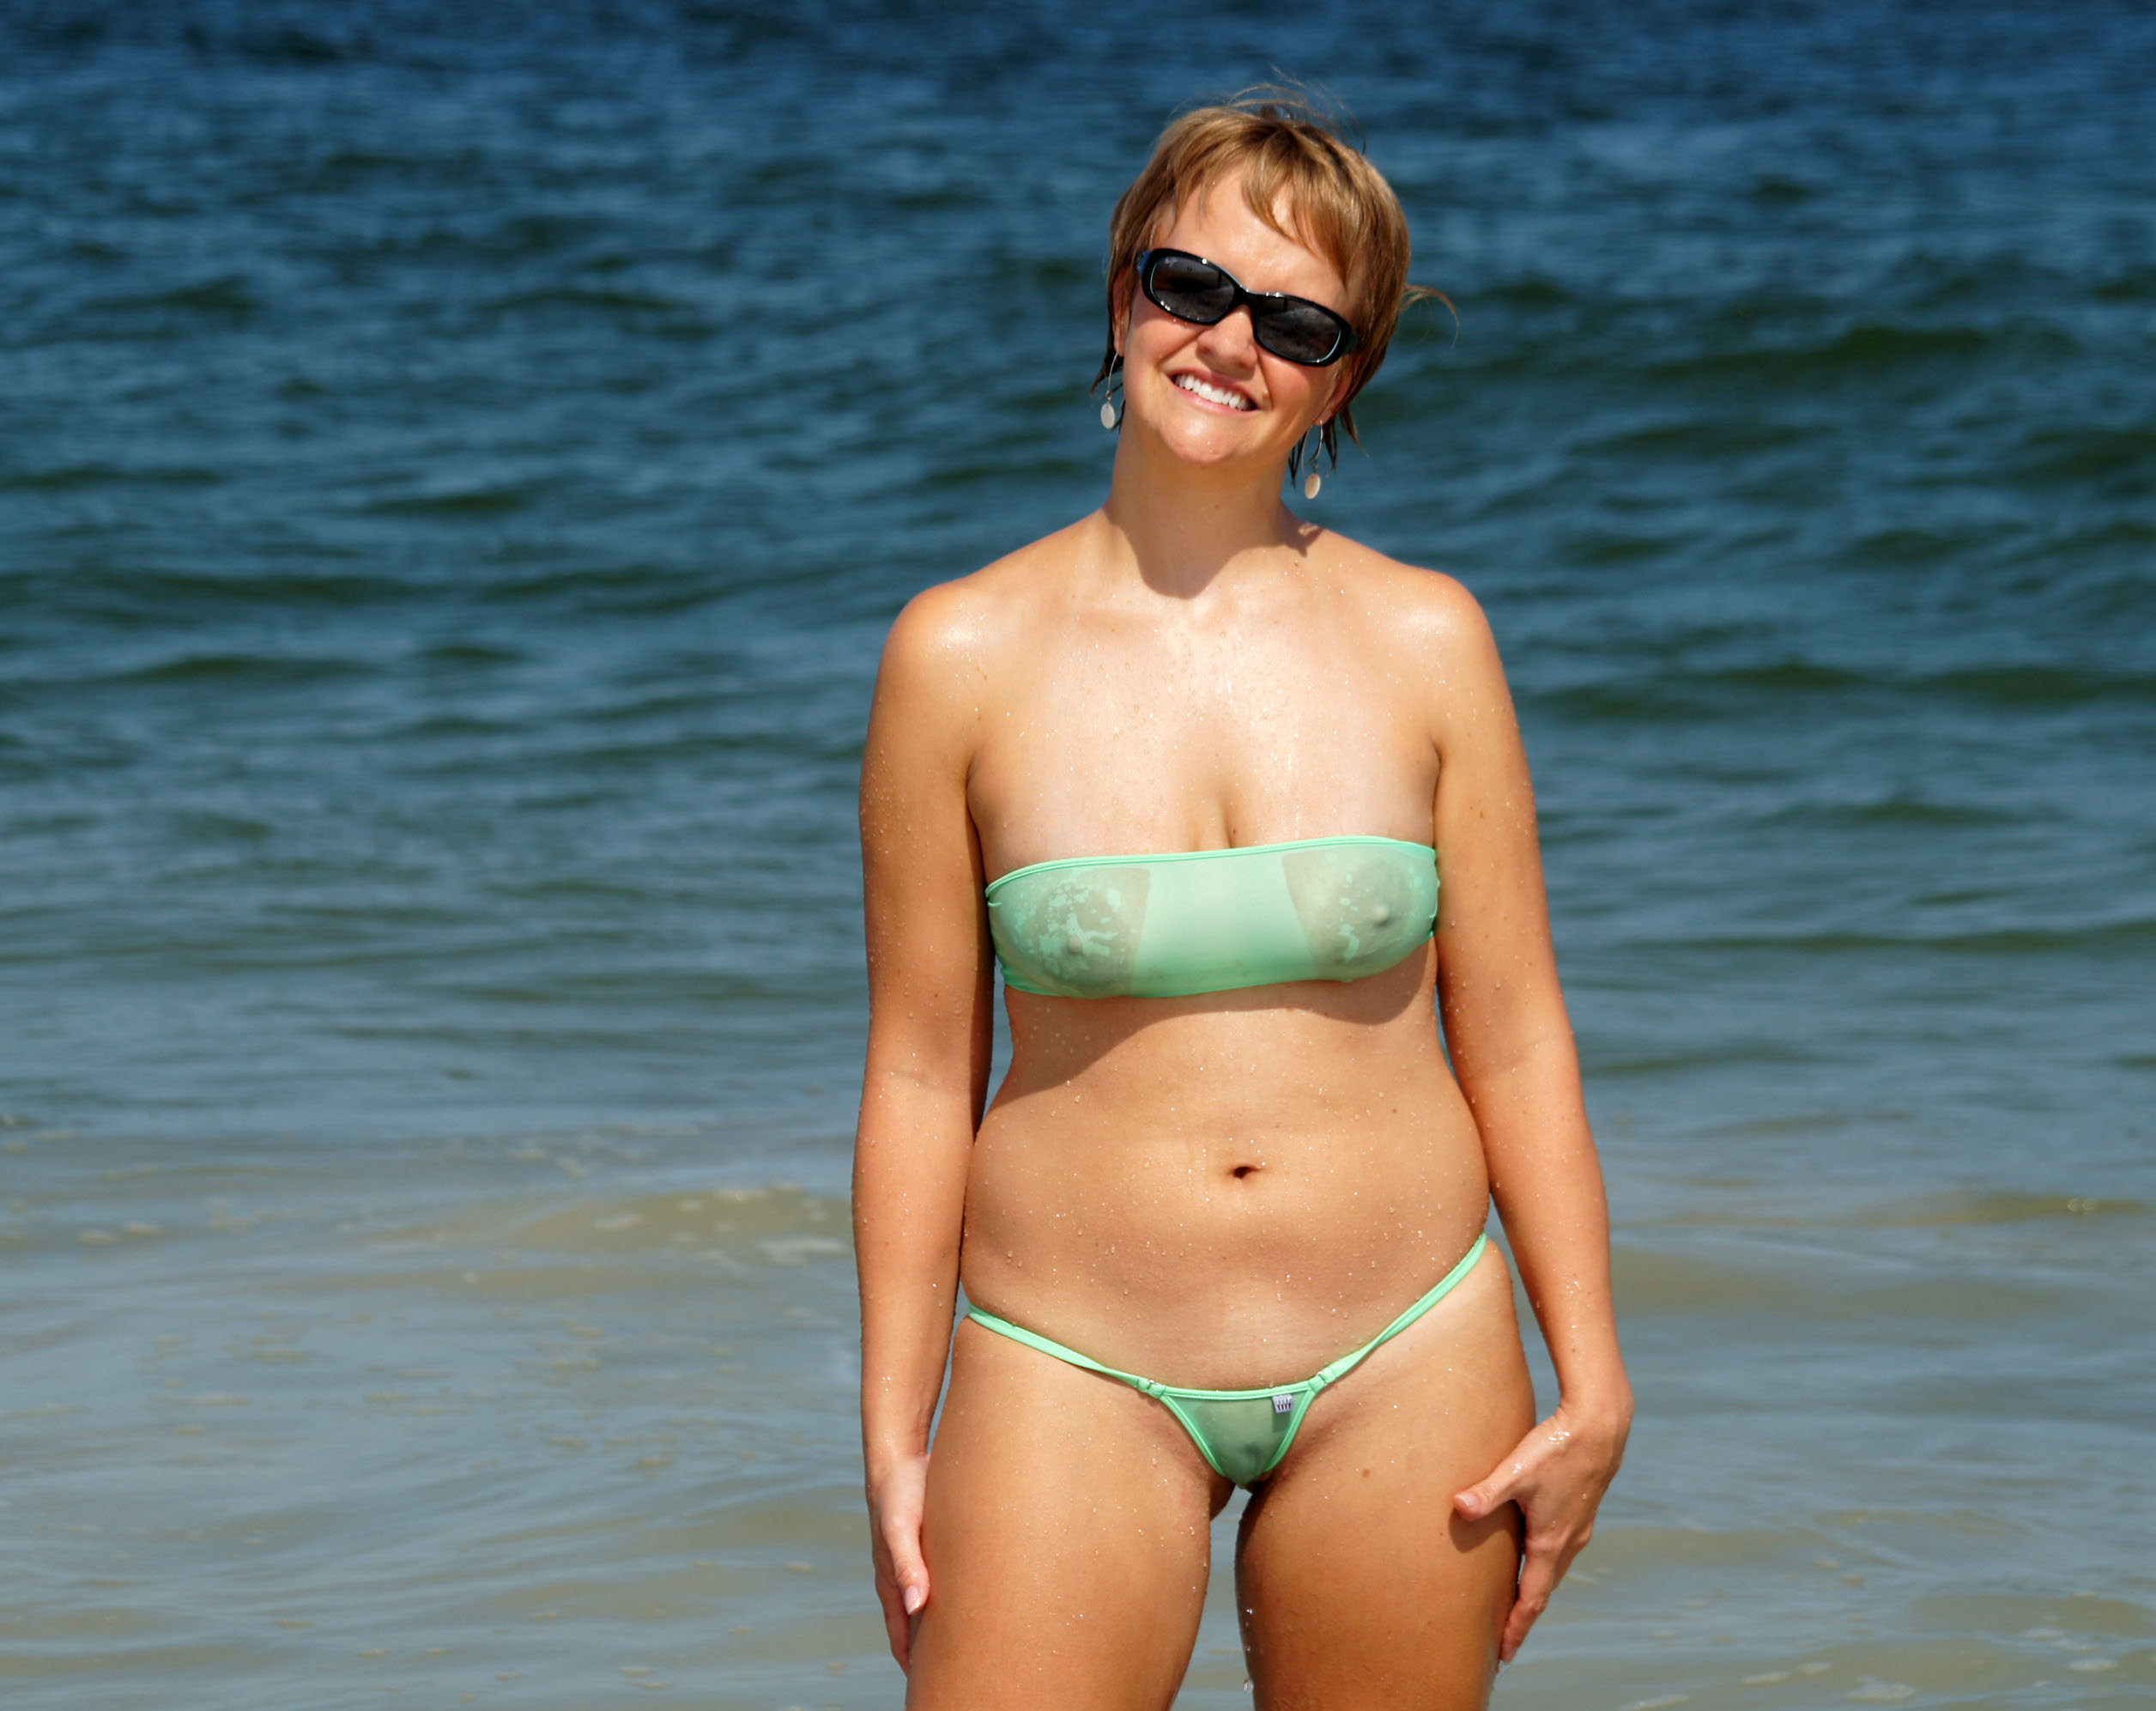 milf smiling on the beach fully exposed in her see through bikini